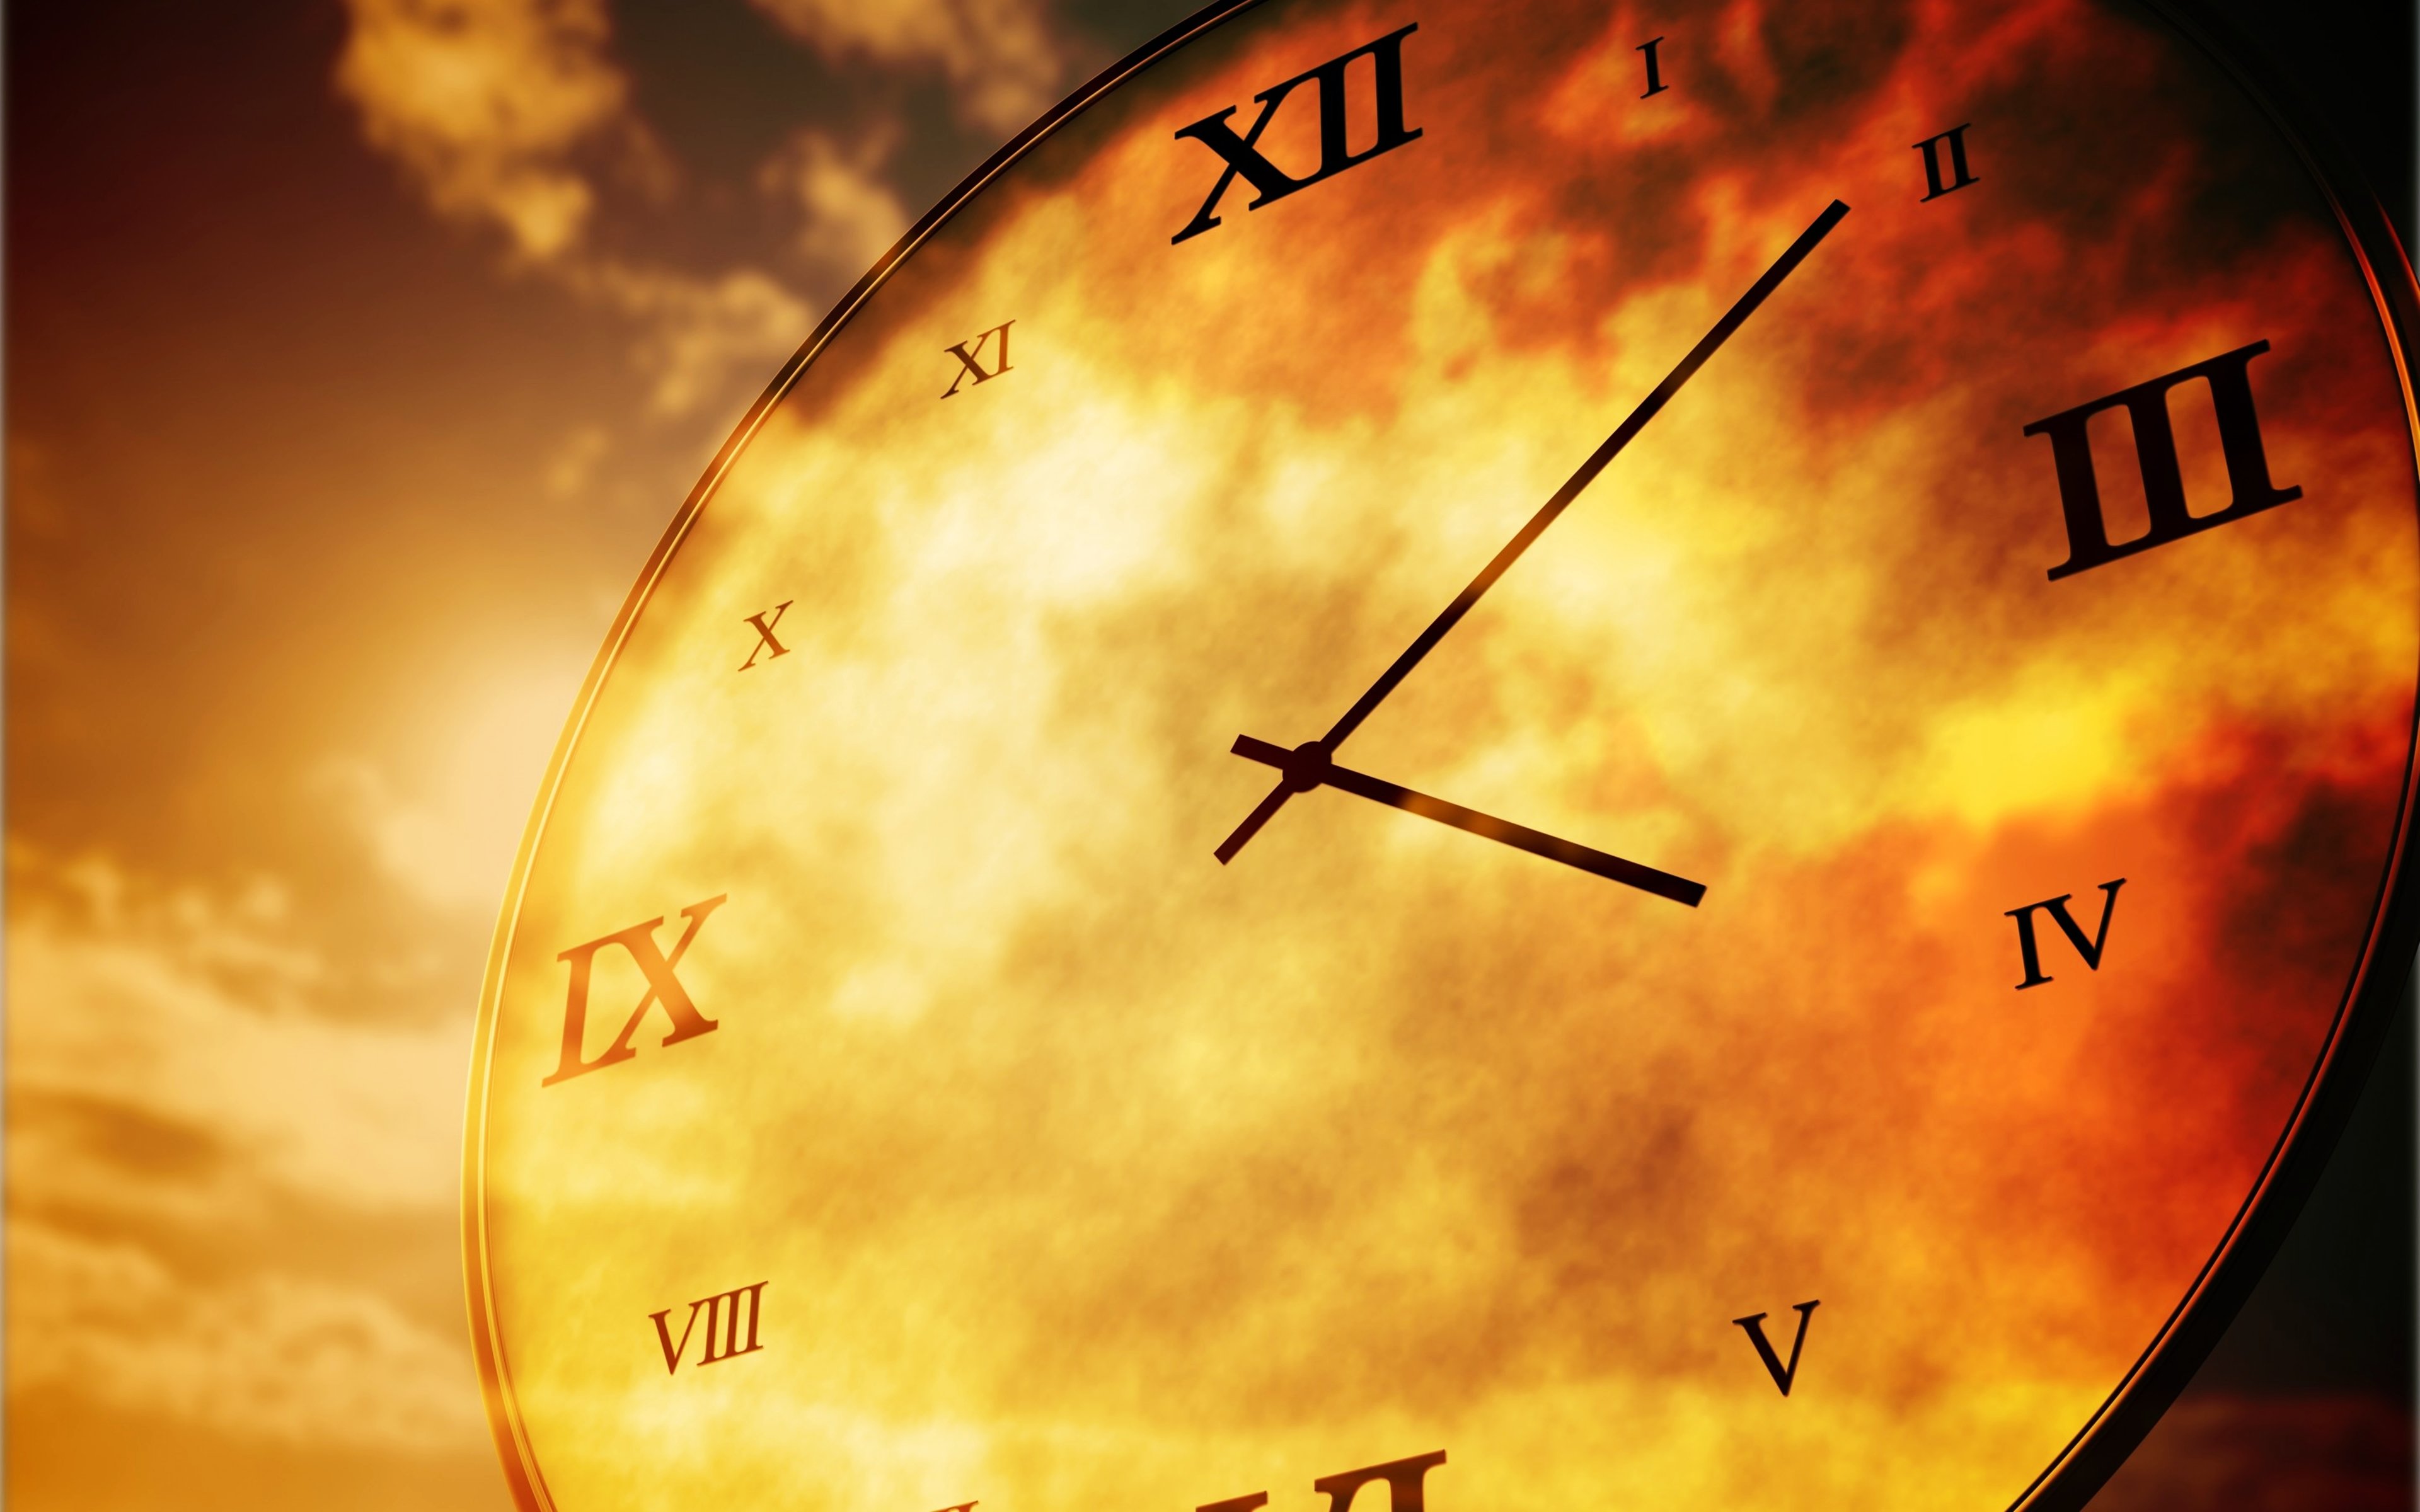 The Dawning Clocks of Time download the new for windows